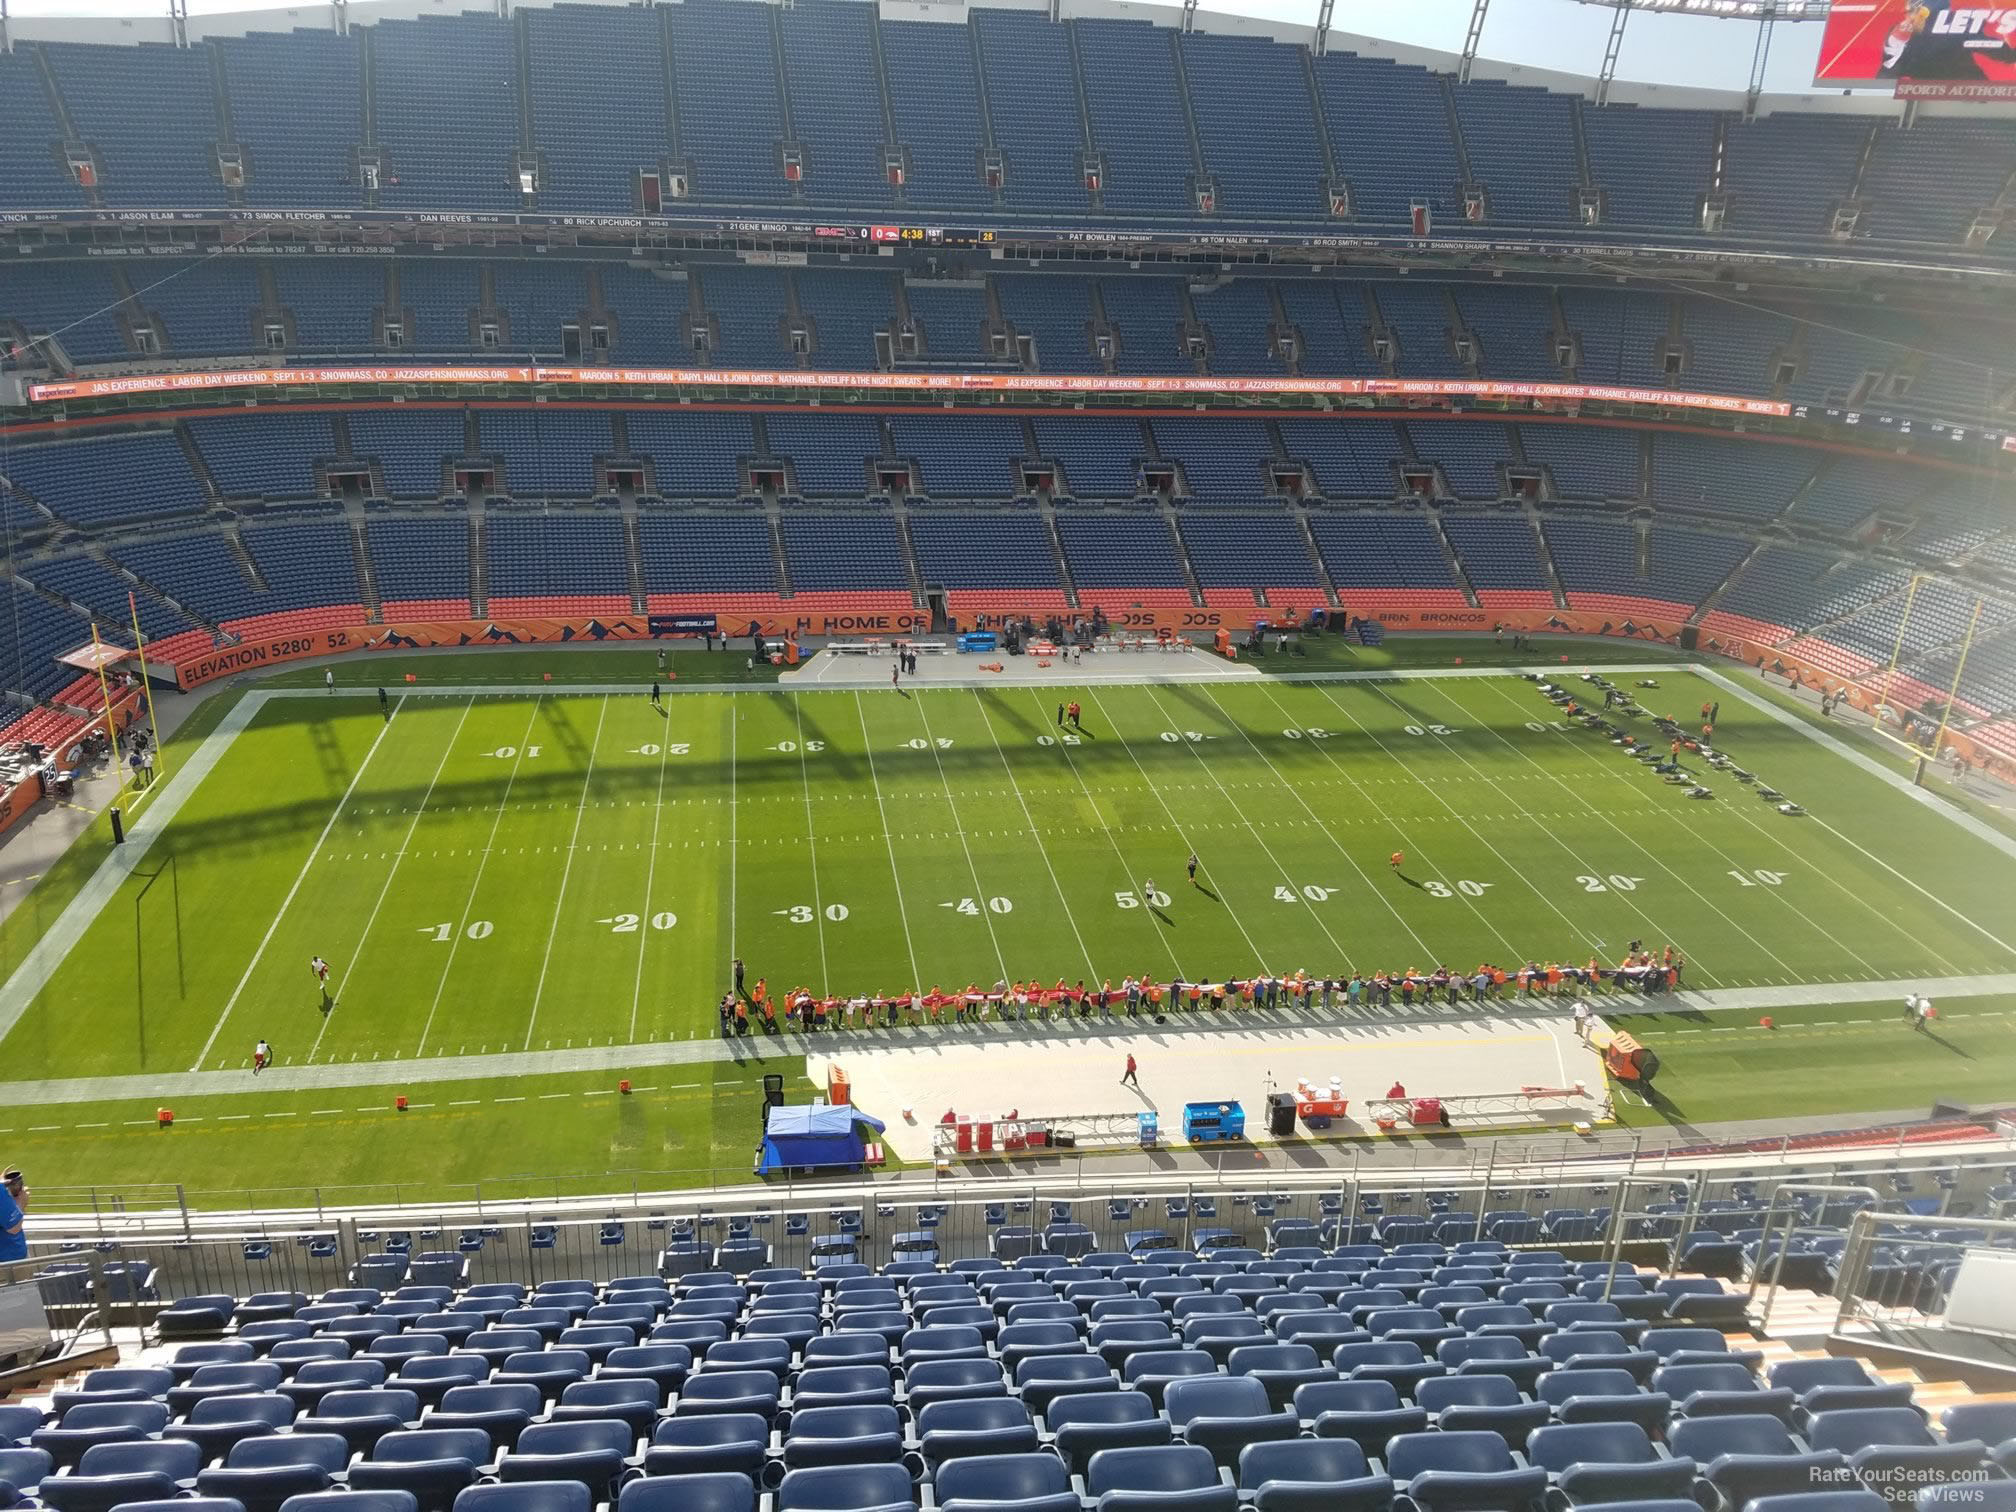 section 536, row 16 seat view  - empower field (at mile high)